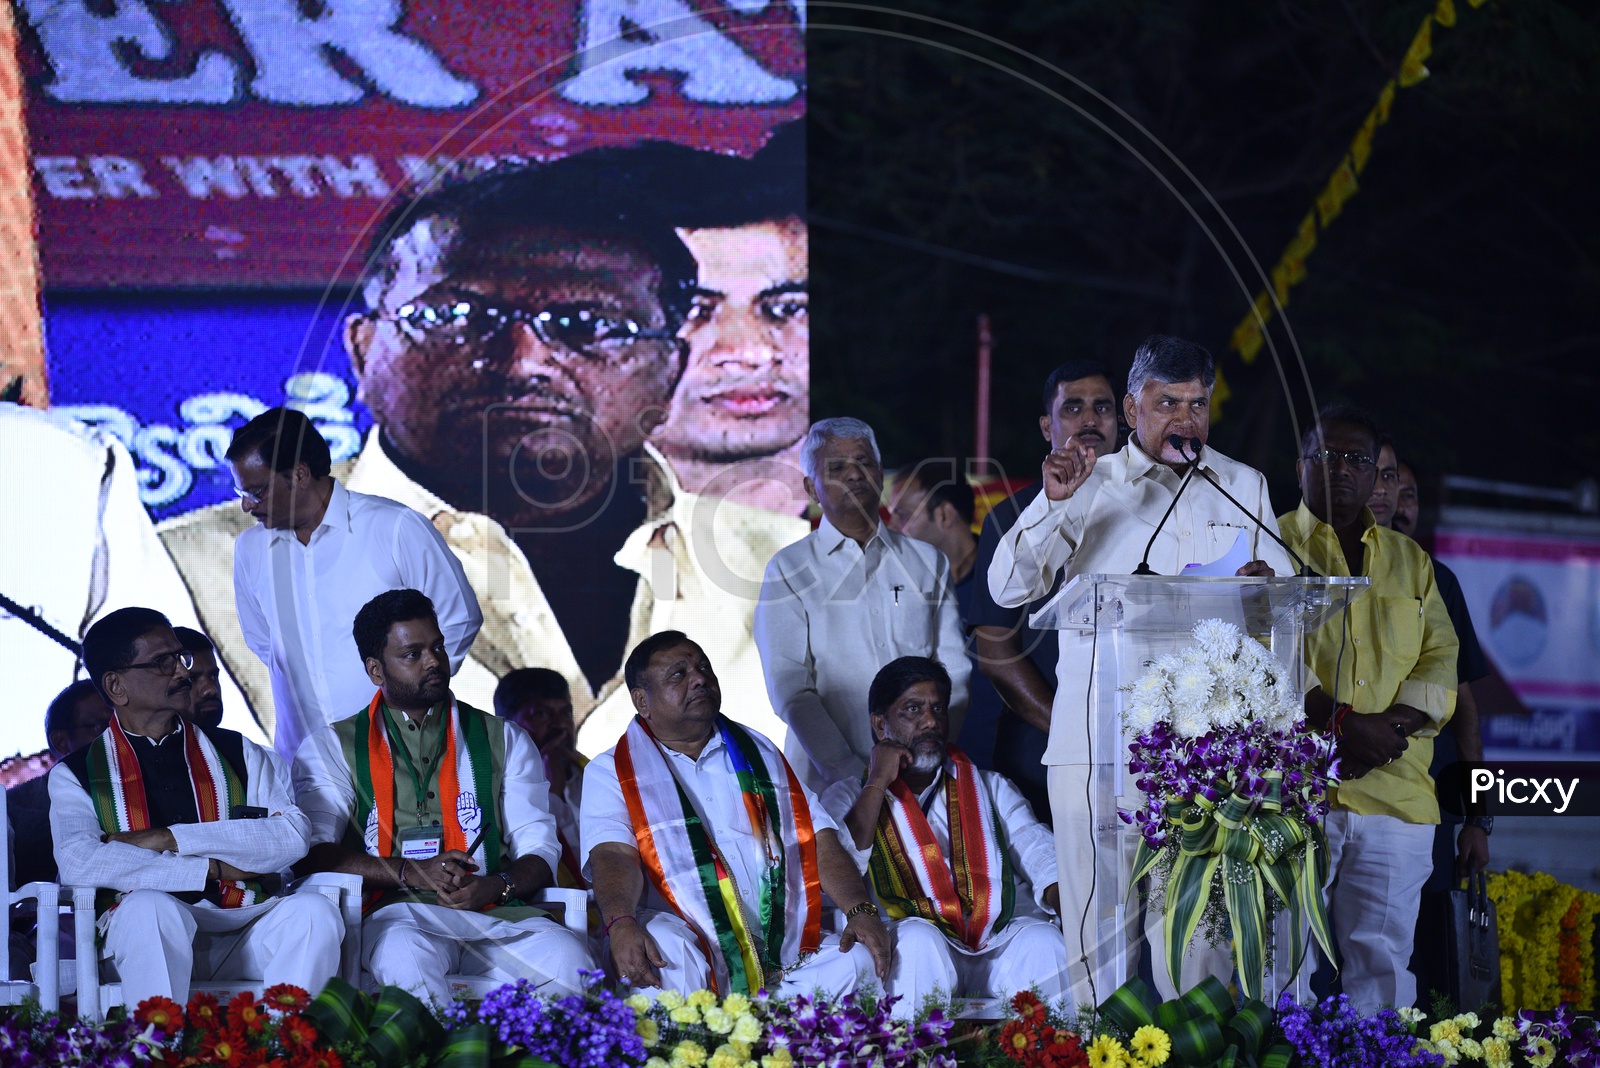 Chief Minister Chandrababu Naidu addressing Public at Party meeting in Ameerpet for Telangana Election Campaign 2018